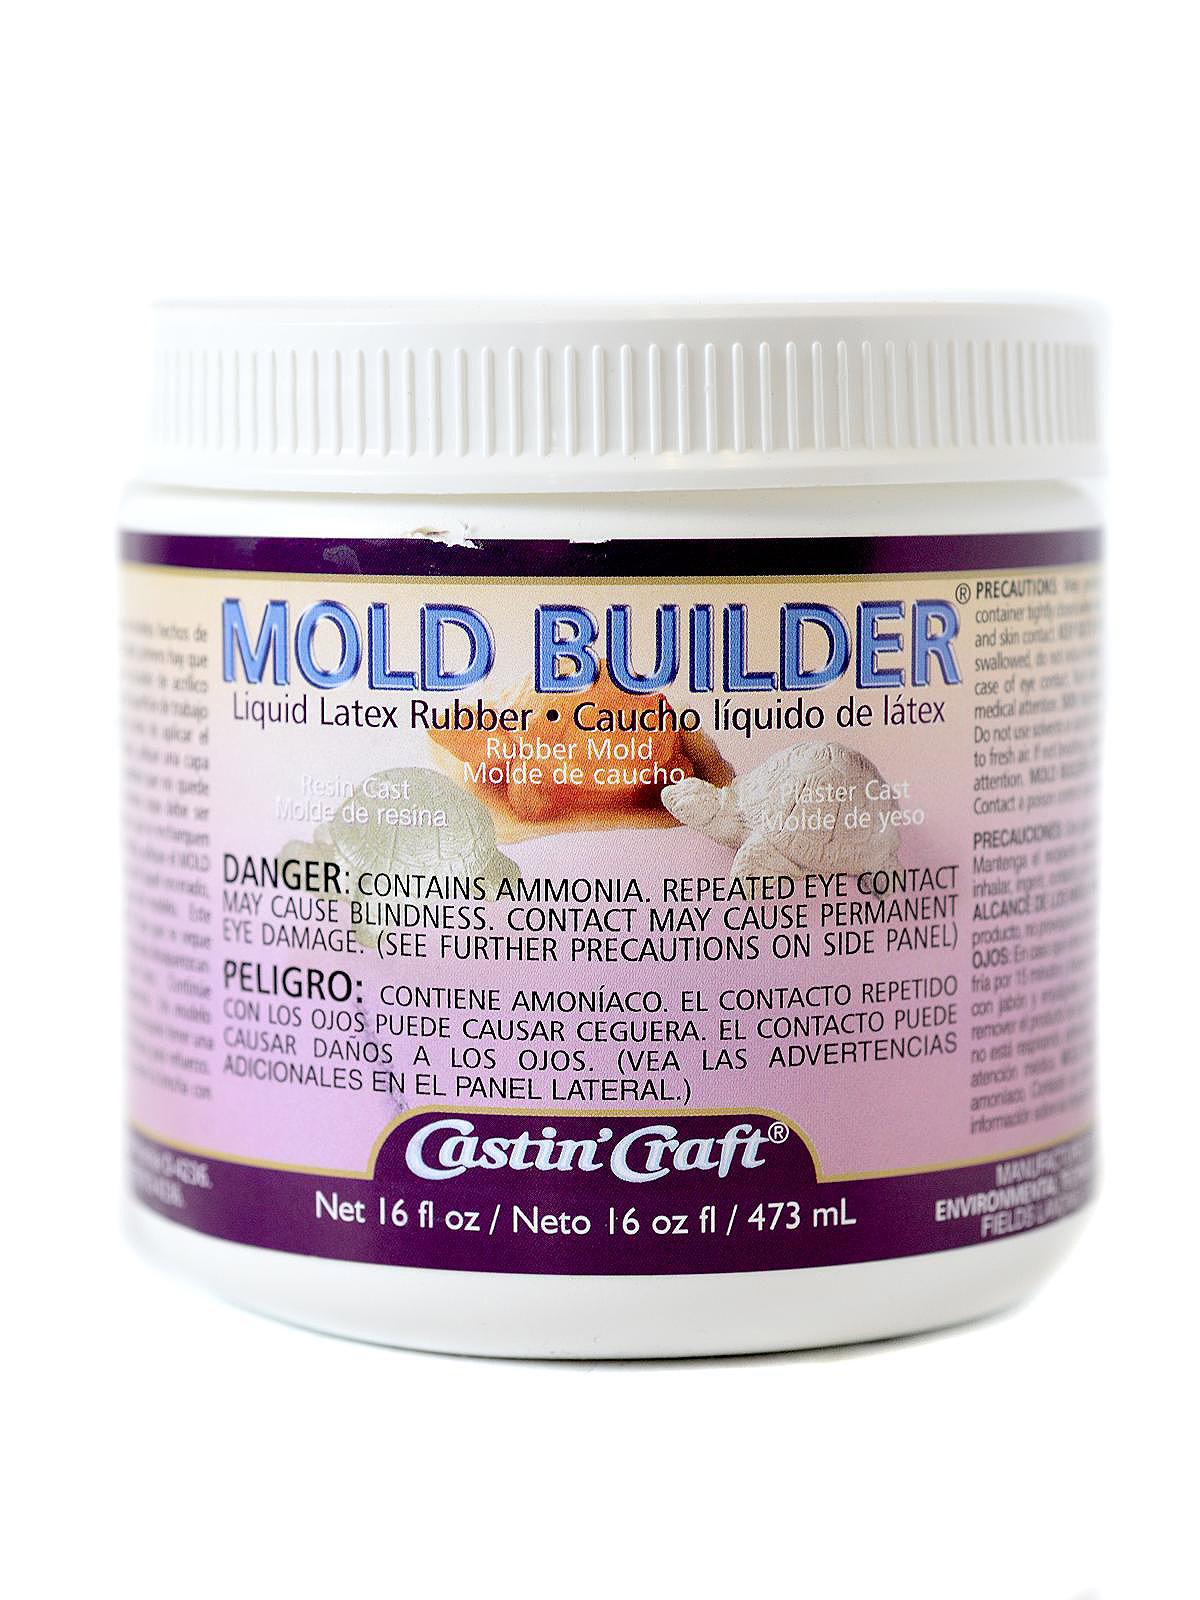 How to Use Mold Builder Liquid Latex Rubber 